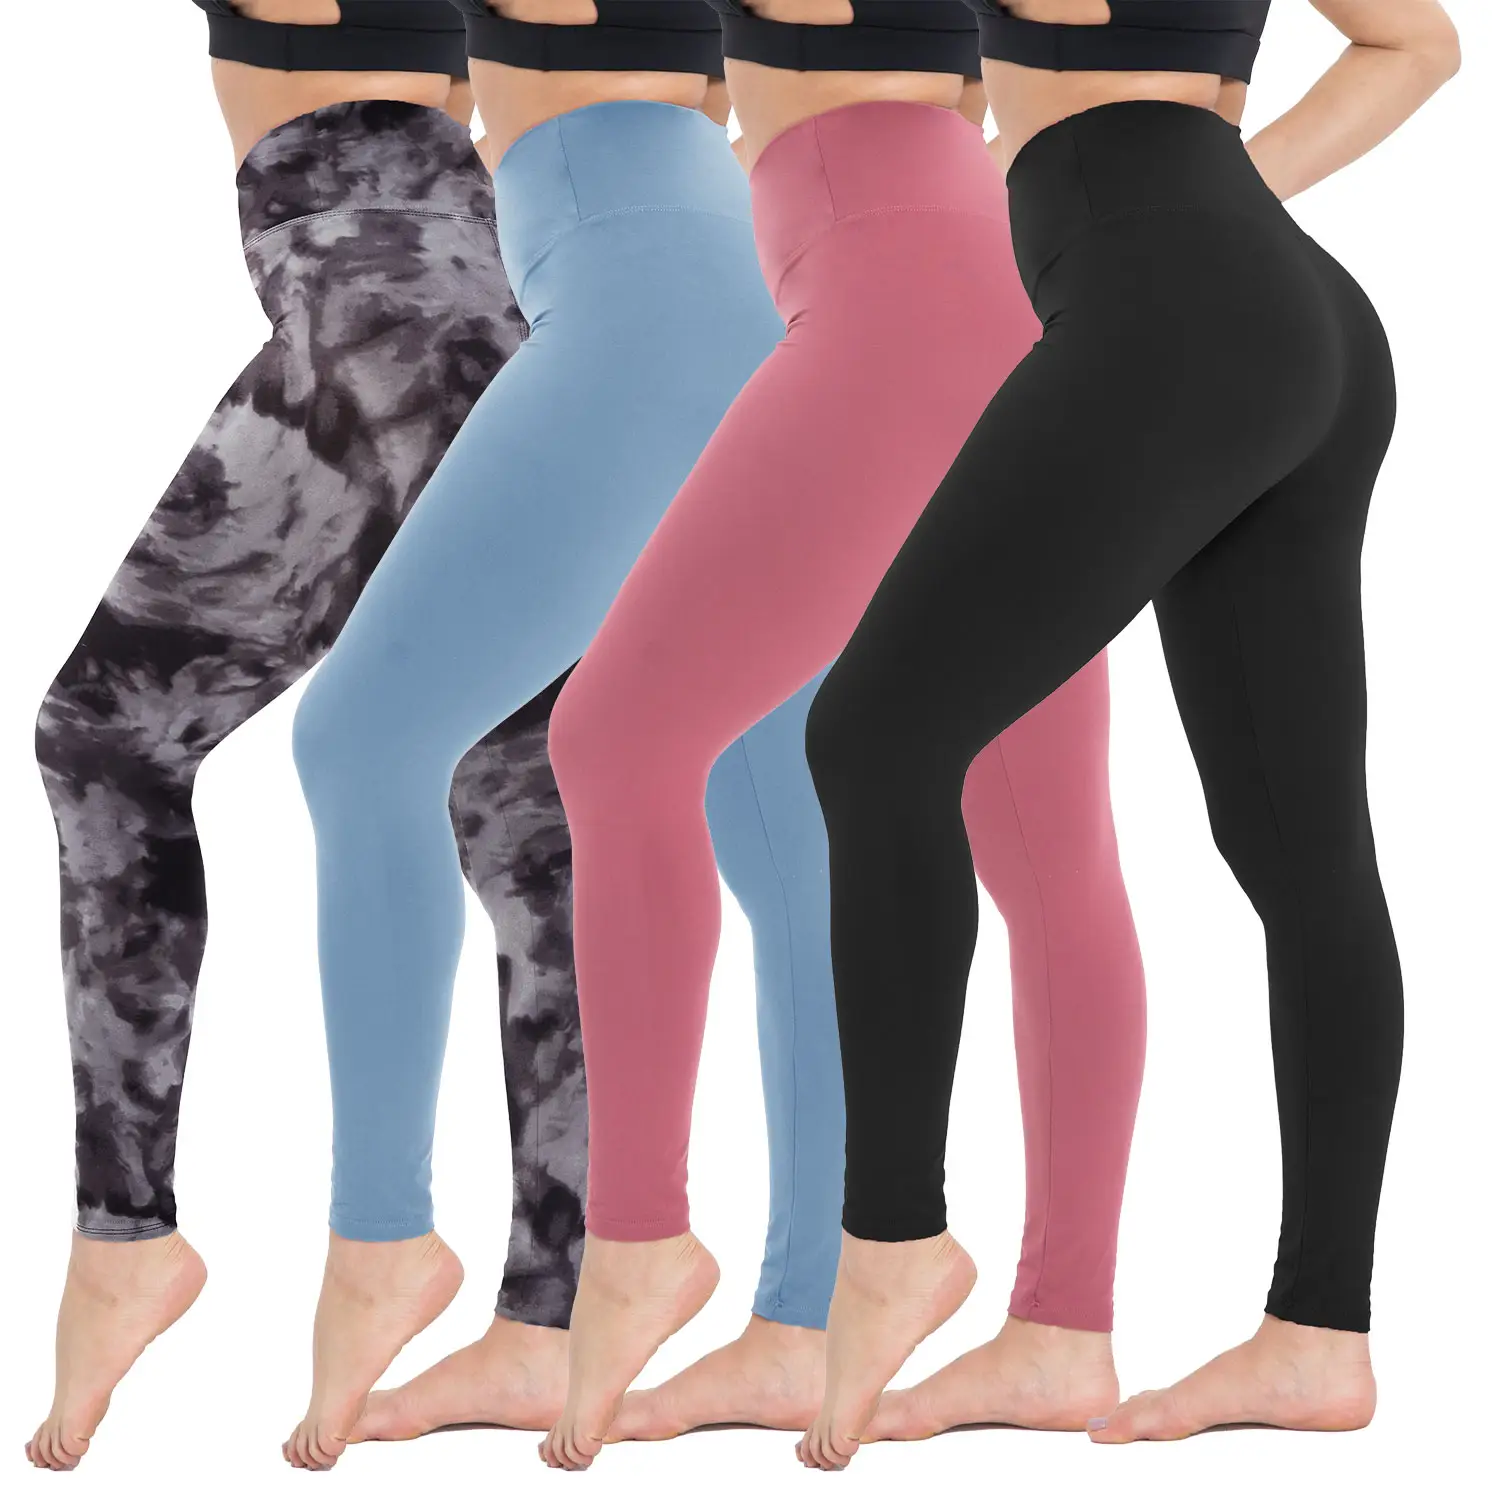 Wholesale Custom Logo 23 Colors High Waisted Workout Tights Pants Super Soft Gym Fitness Leggings for Women